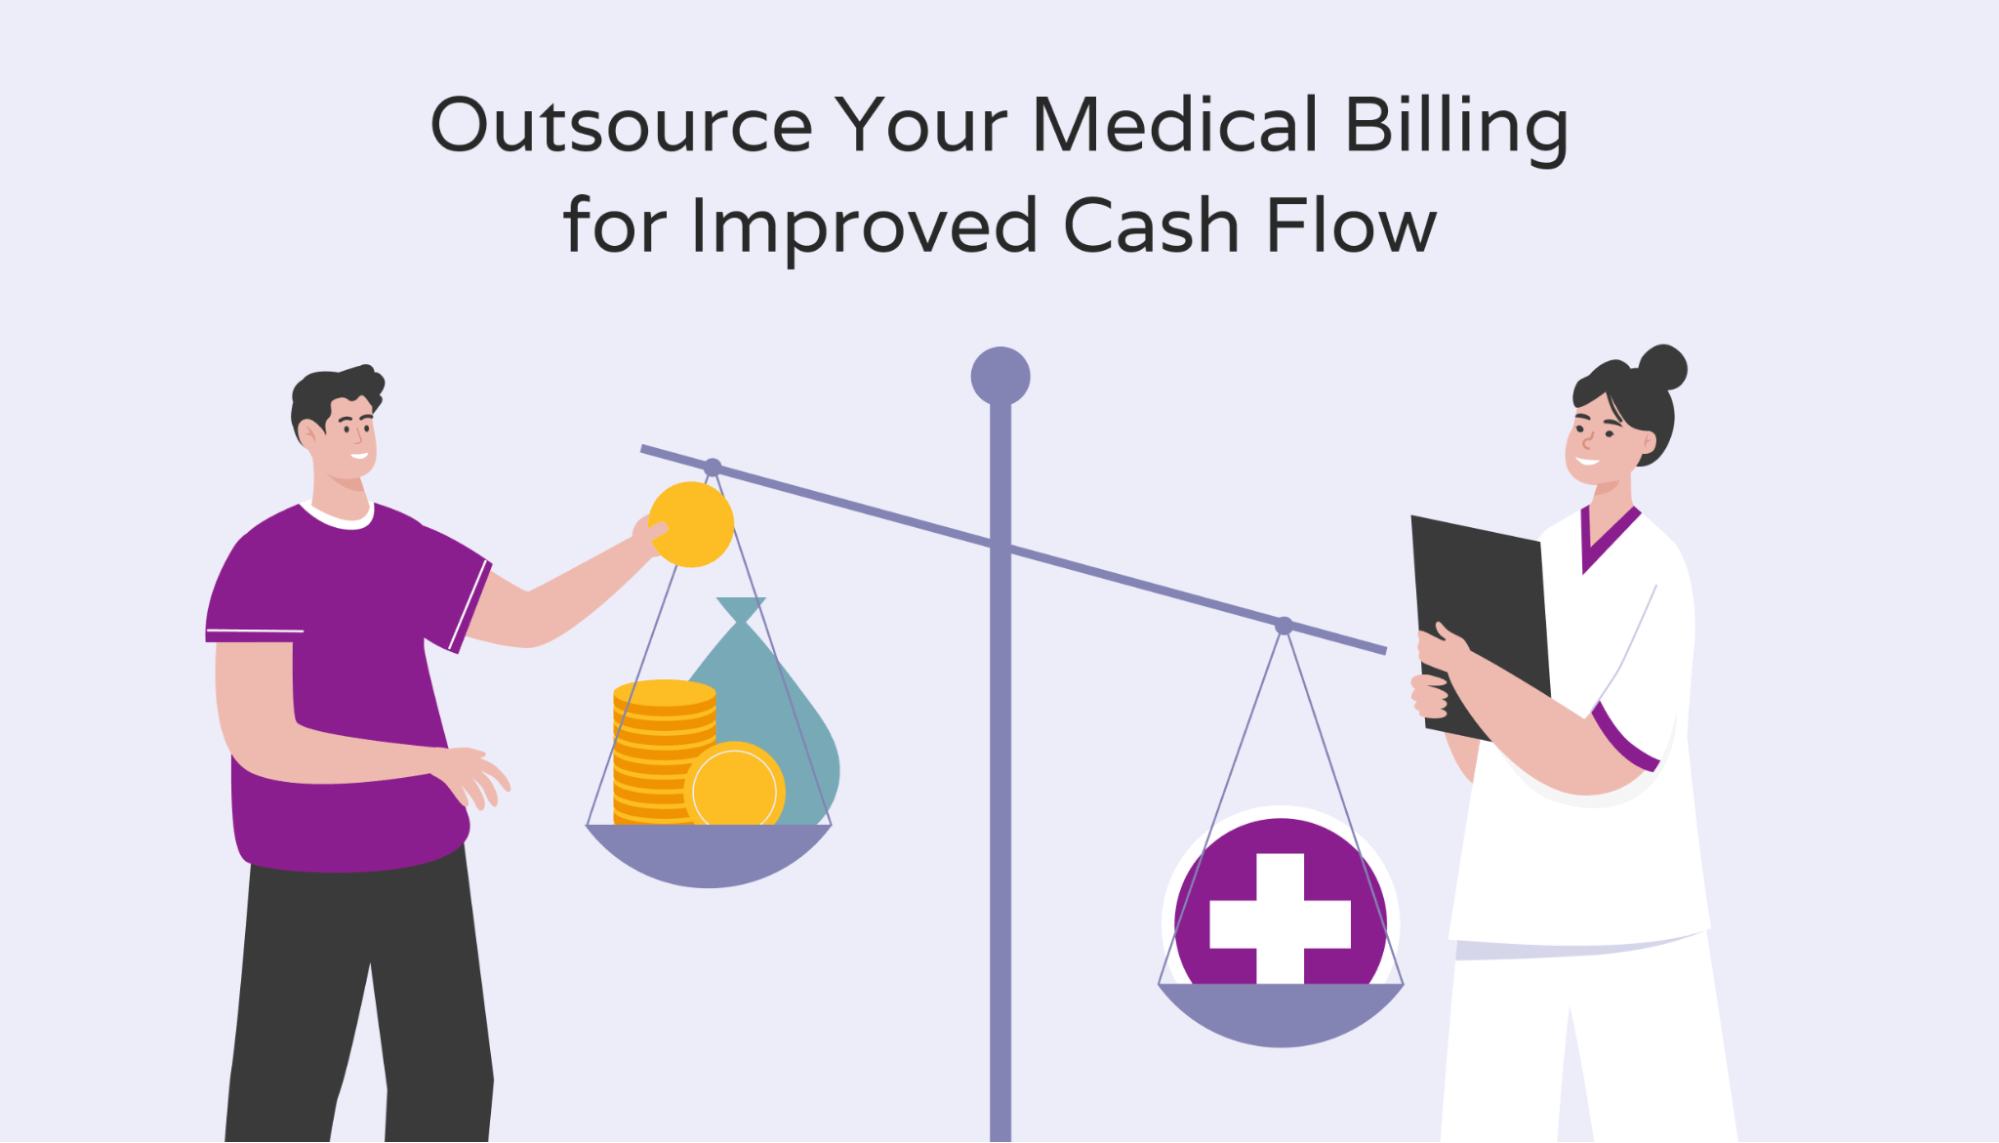 Outsource medical billing to improve your cash flow